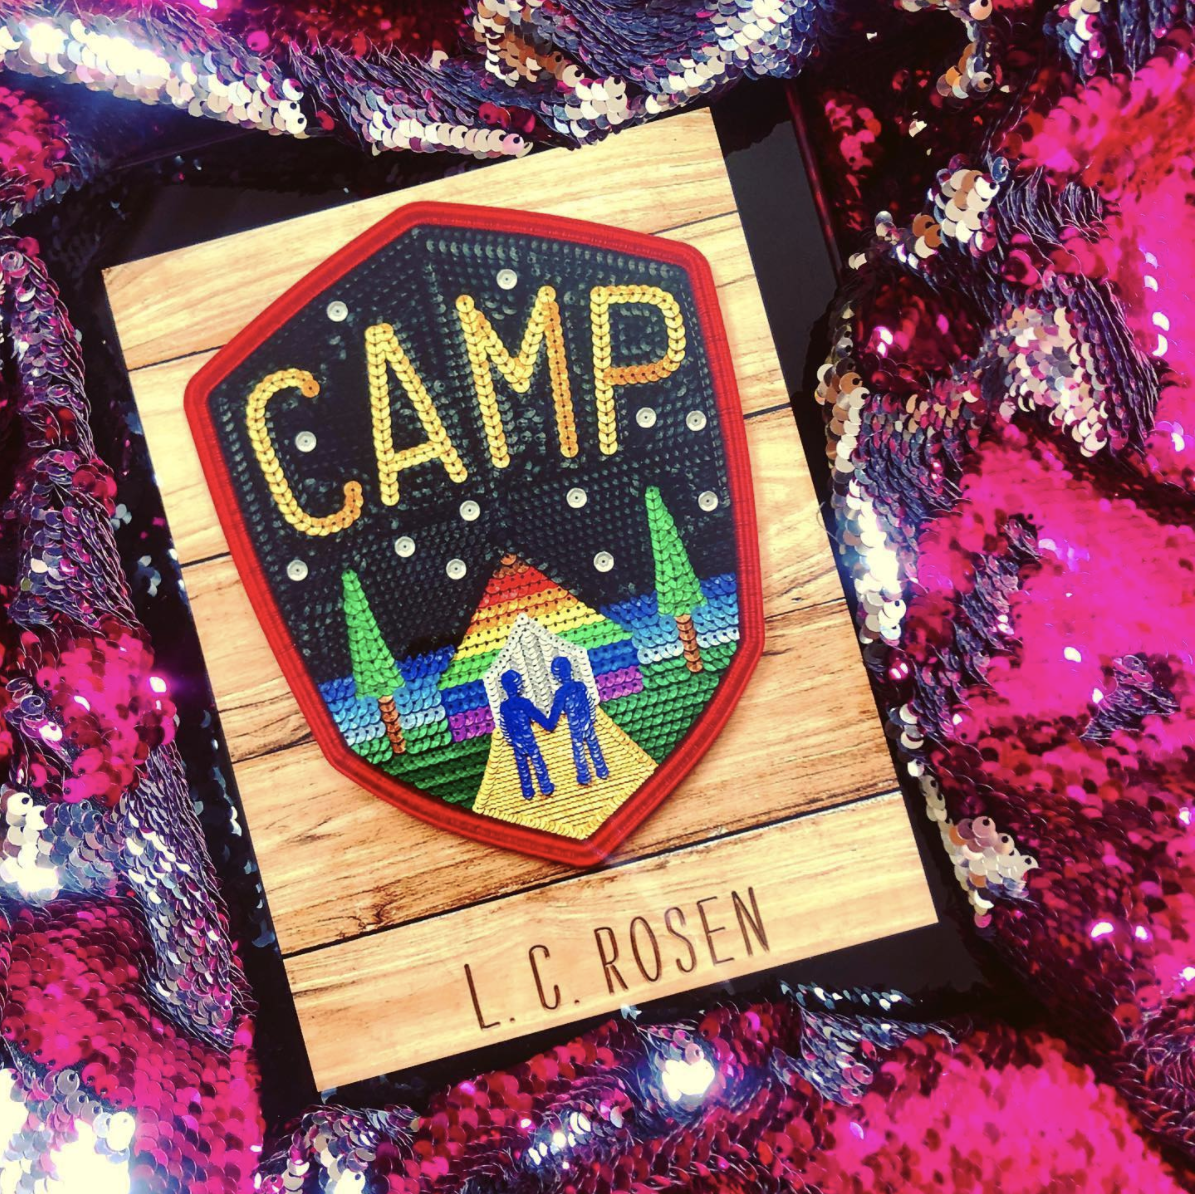 NOVL - Instagram image of book cover for 'Camp' by L.C. Rosen situated in hot pink and silver sequins